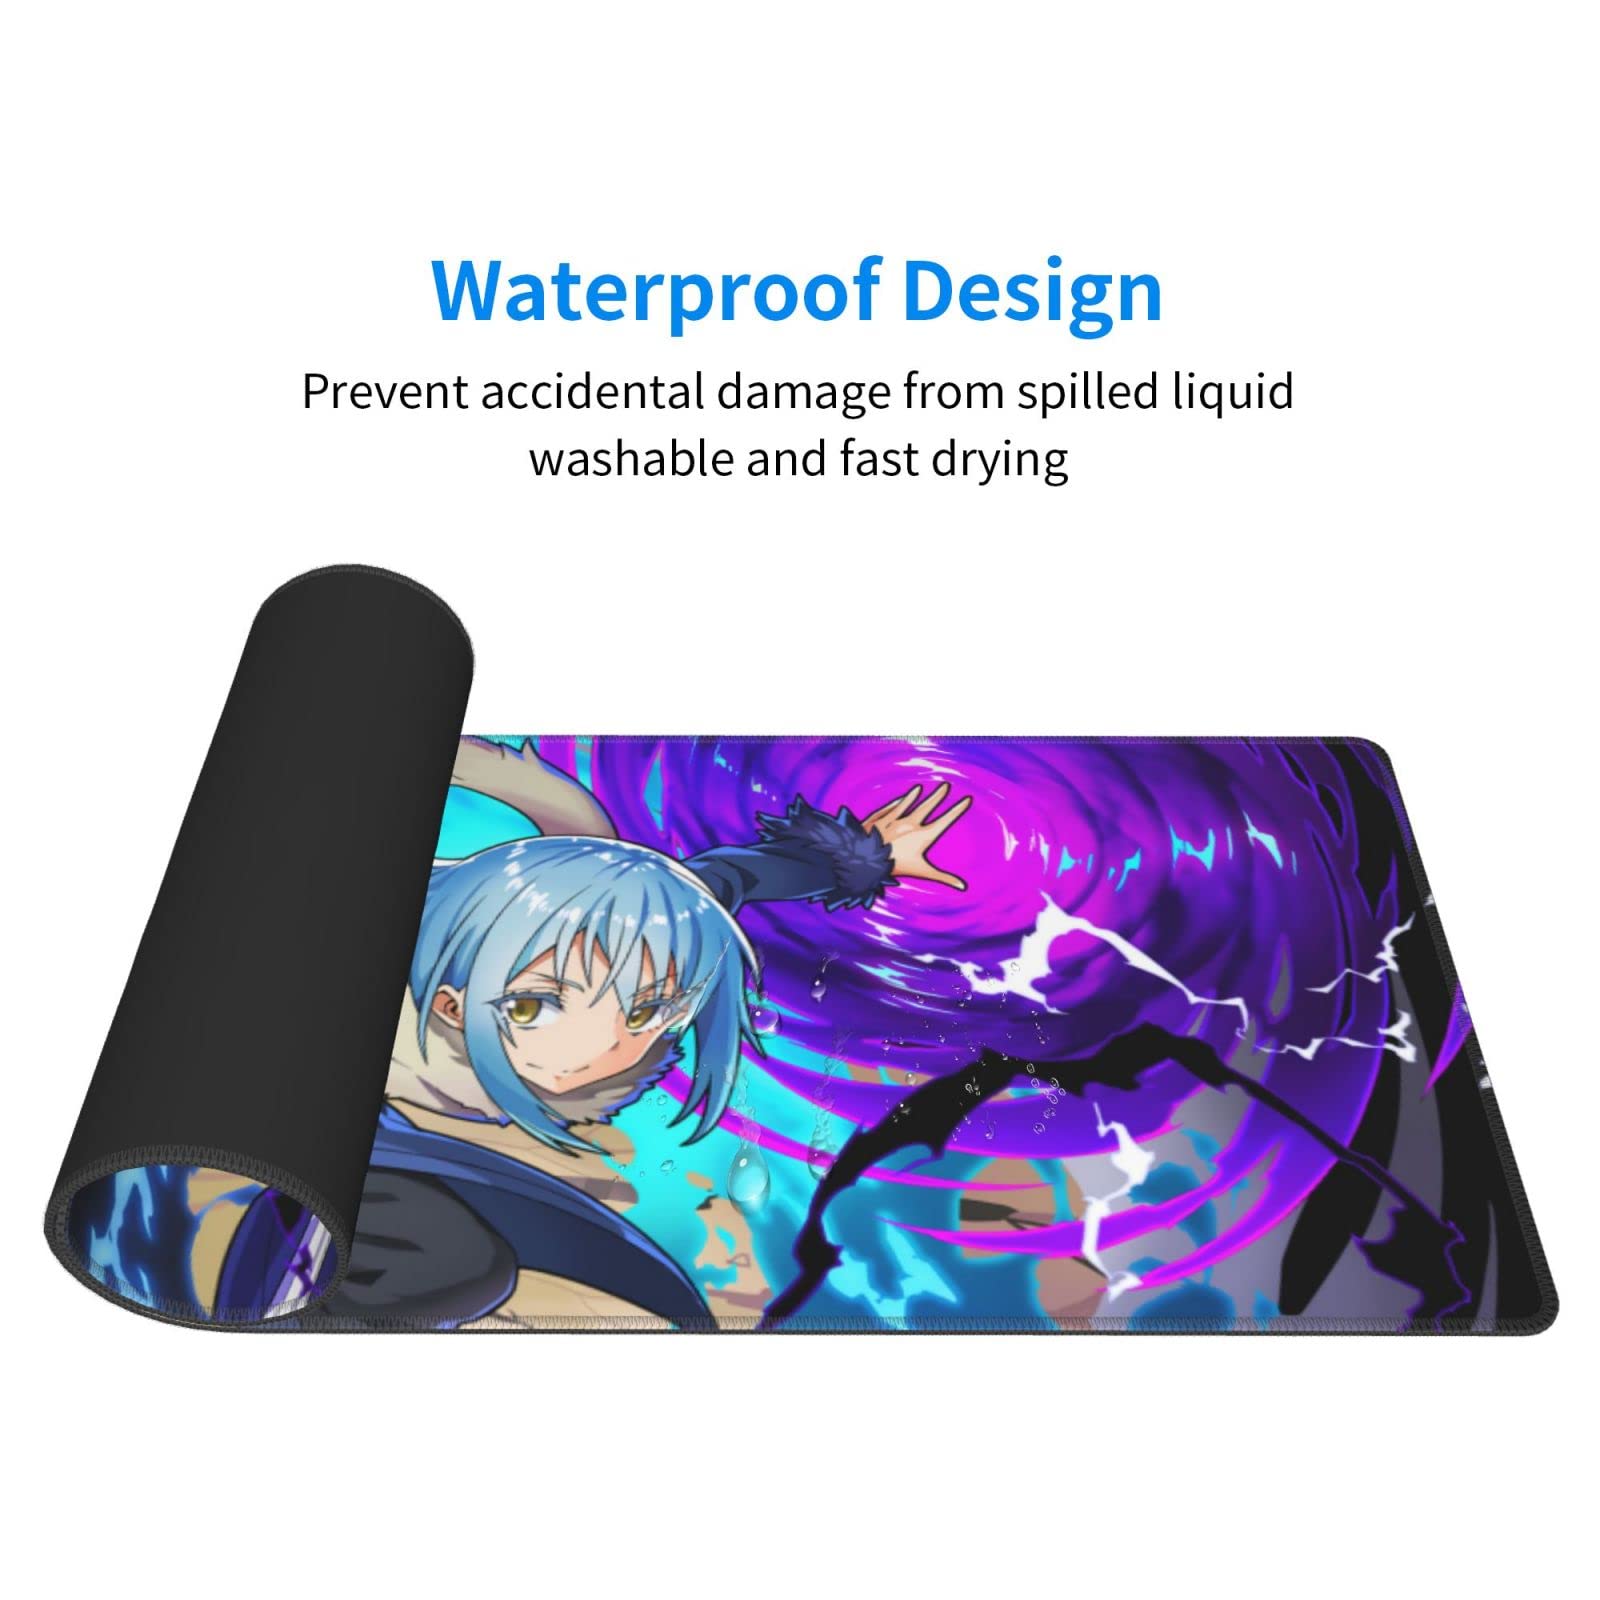 Amazing anime mouse pads for your computer - TenStickers